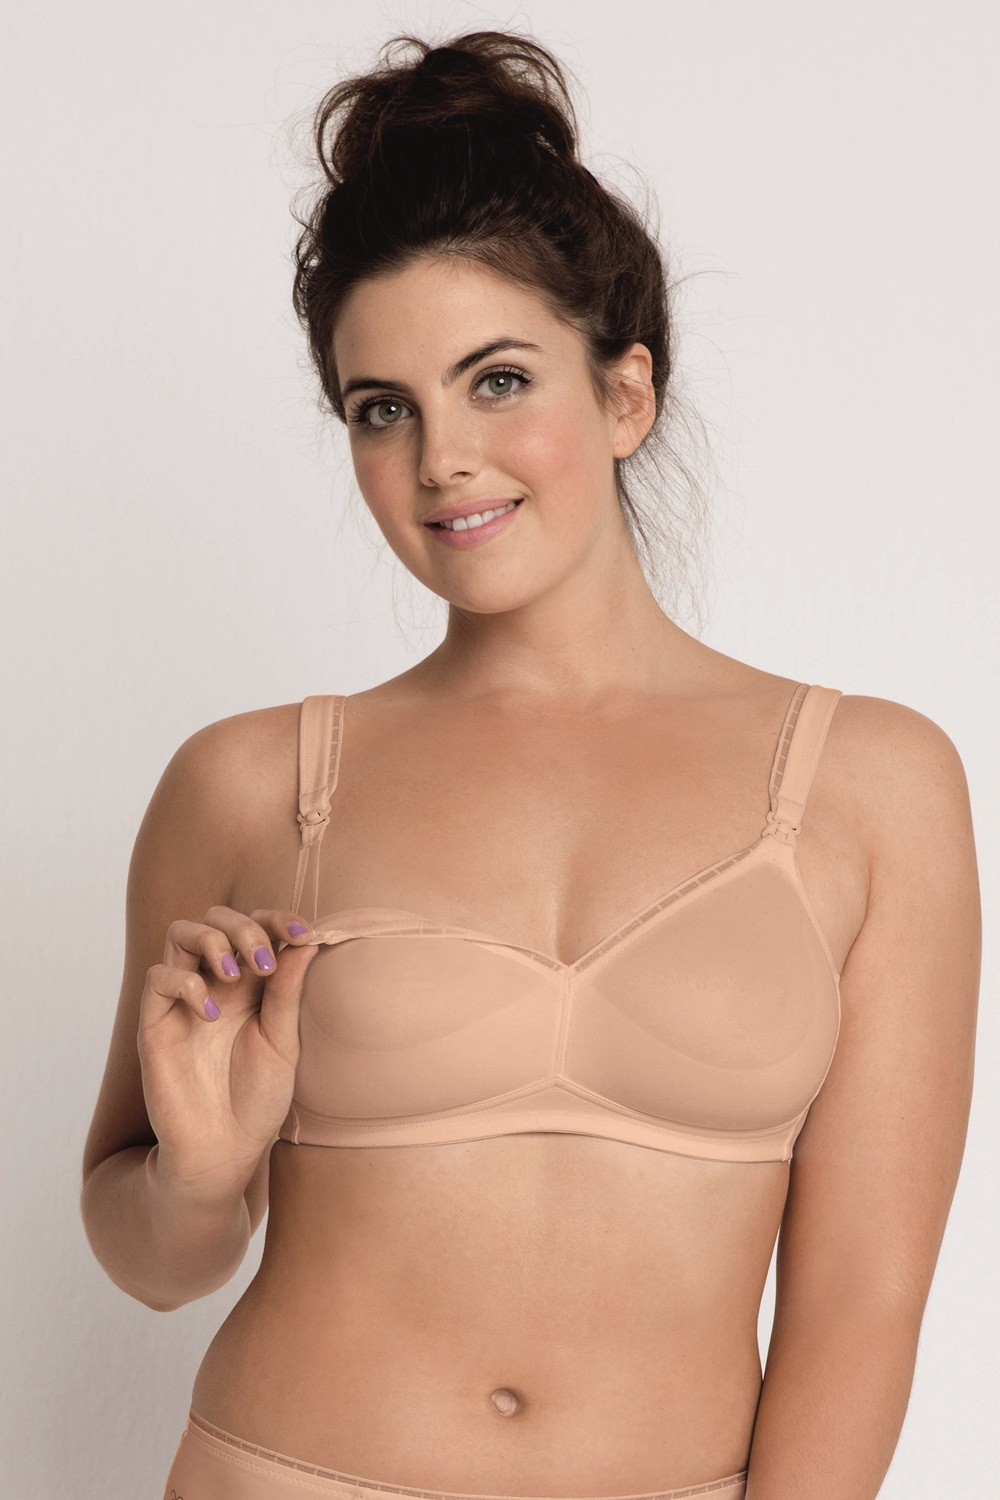 https://aldipa.gr/eshop/4179-superlarge_default/nonwired-nursing-bra-made-of-fine-microfiber-soft-cups-without-seams-perfect-support-5080.jpg